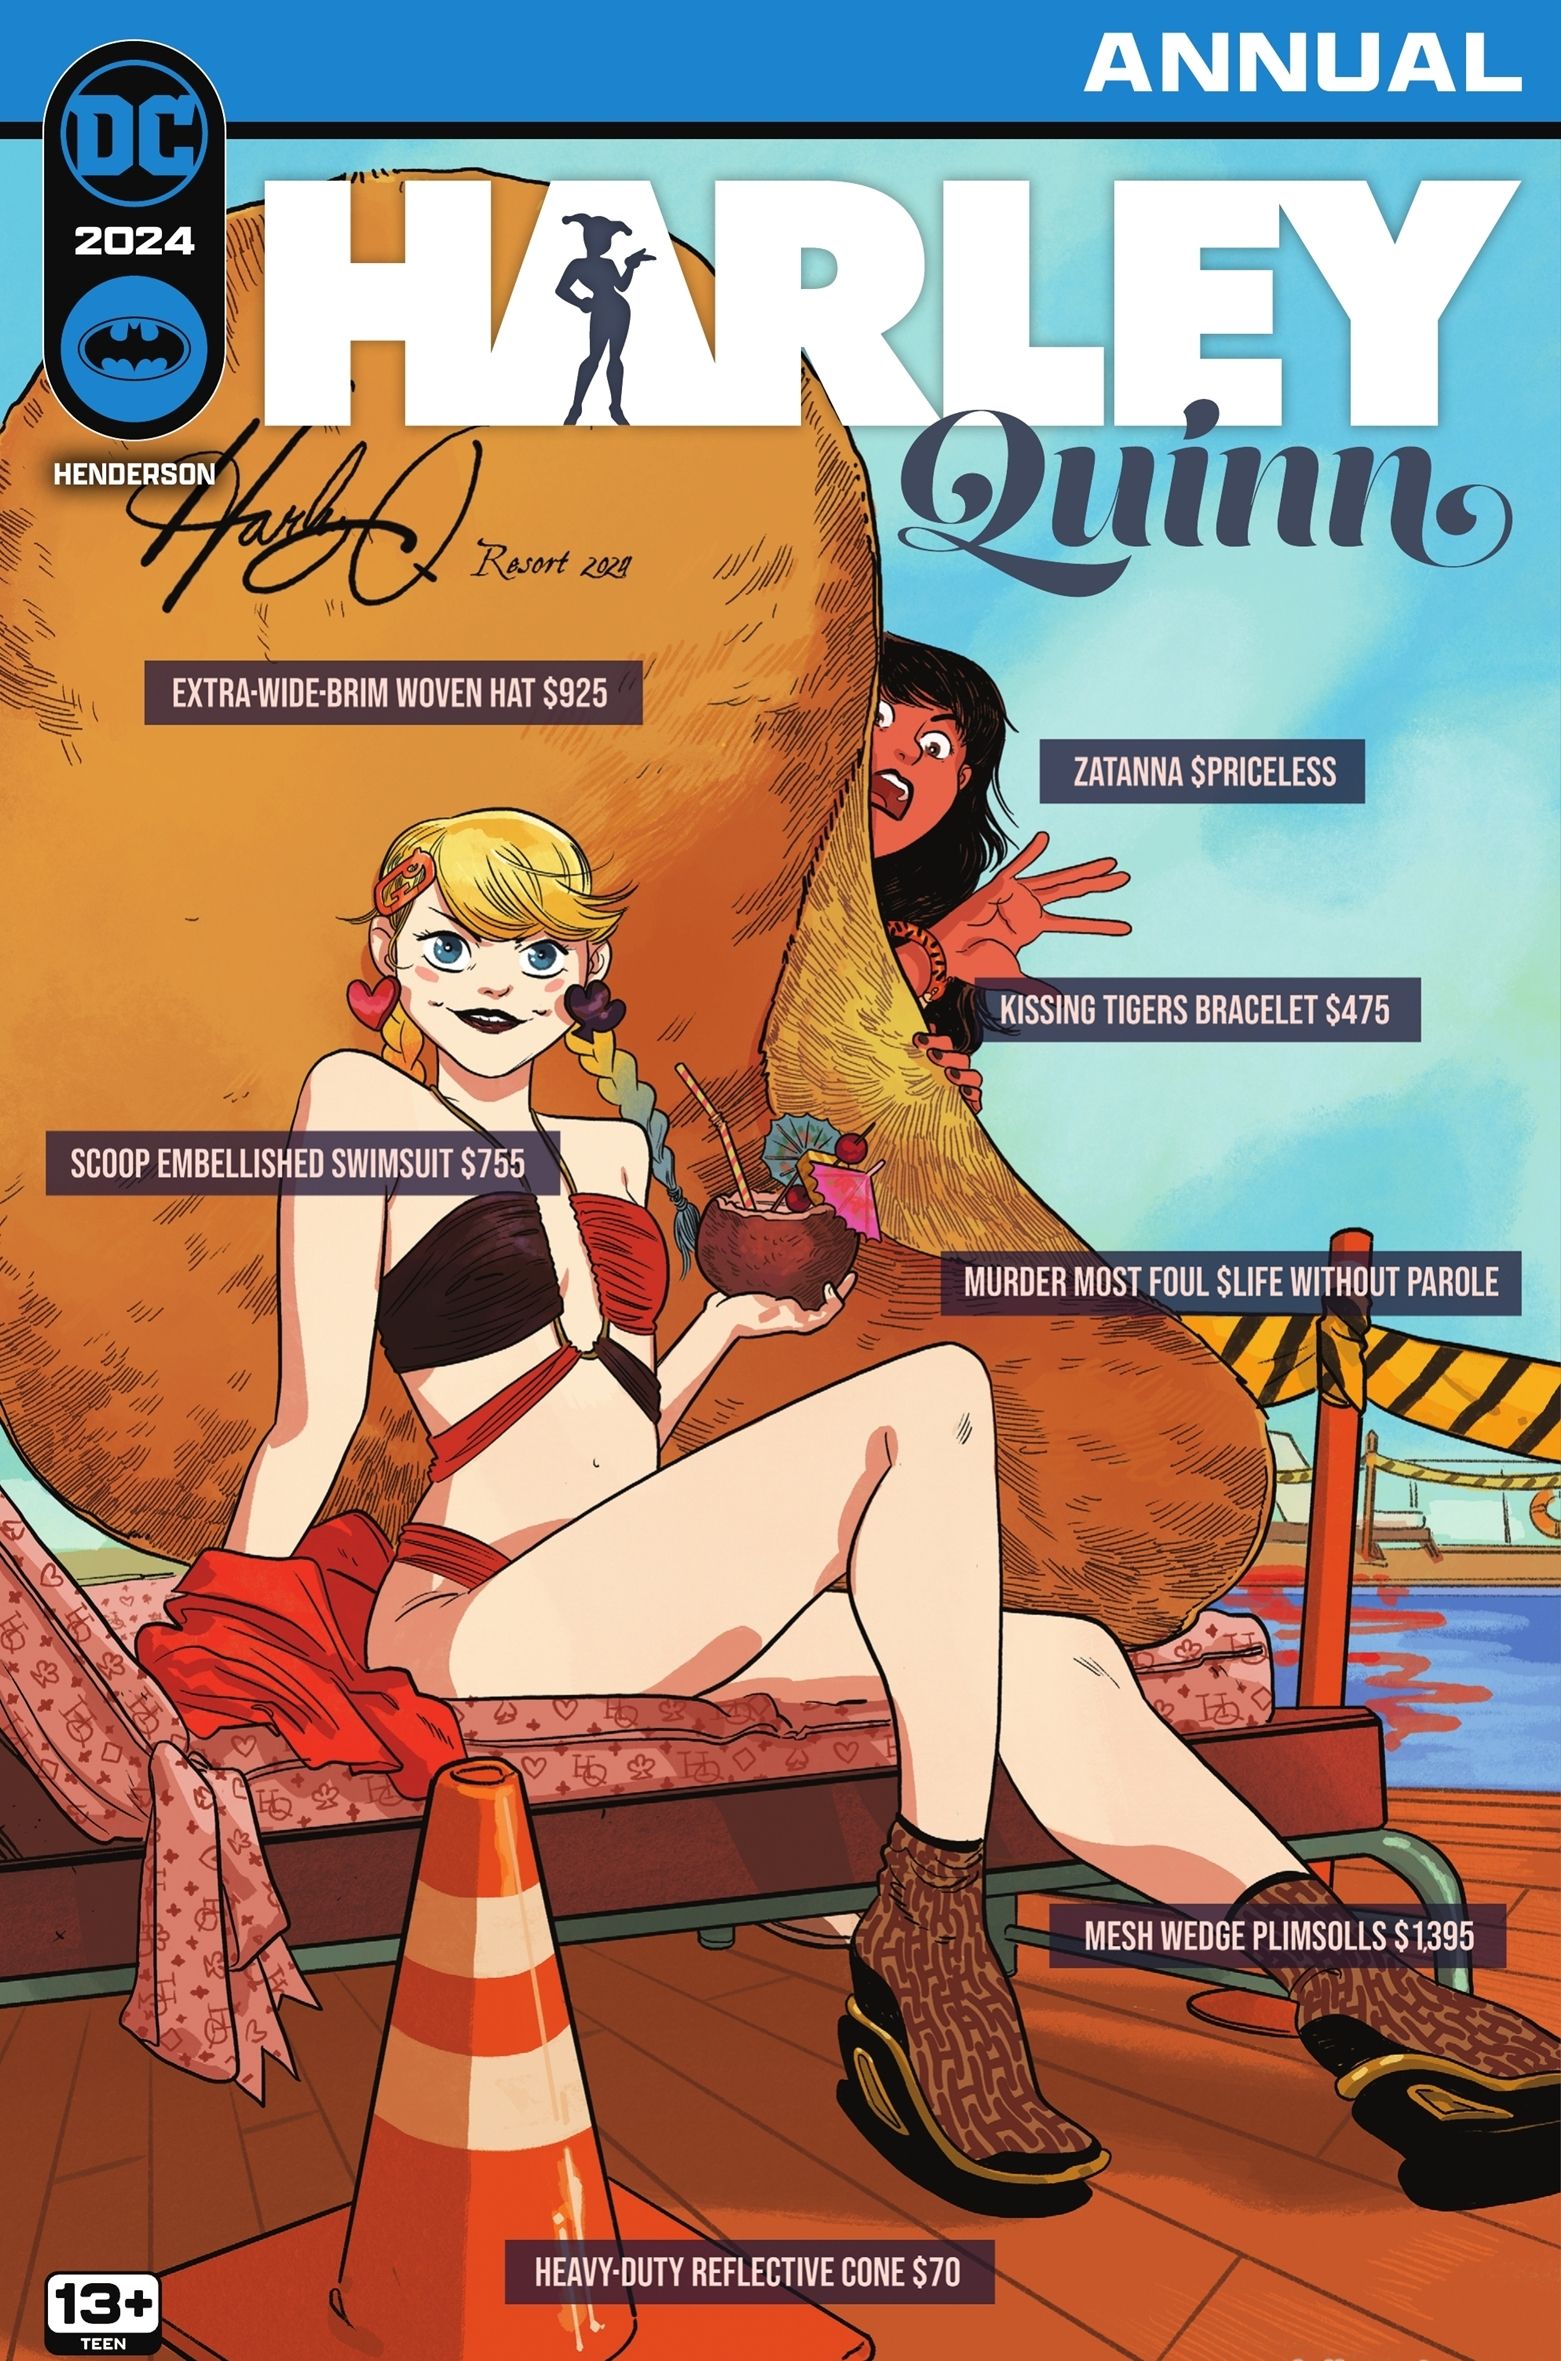 Harley Quinn sits on a lounge chair in a bikini and a large wide-brimmed. Zatanna peaks around the hat. 